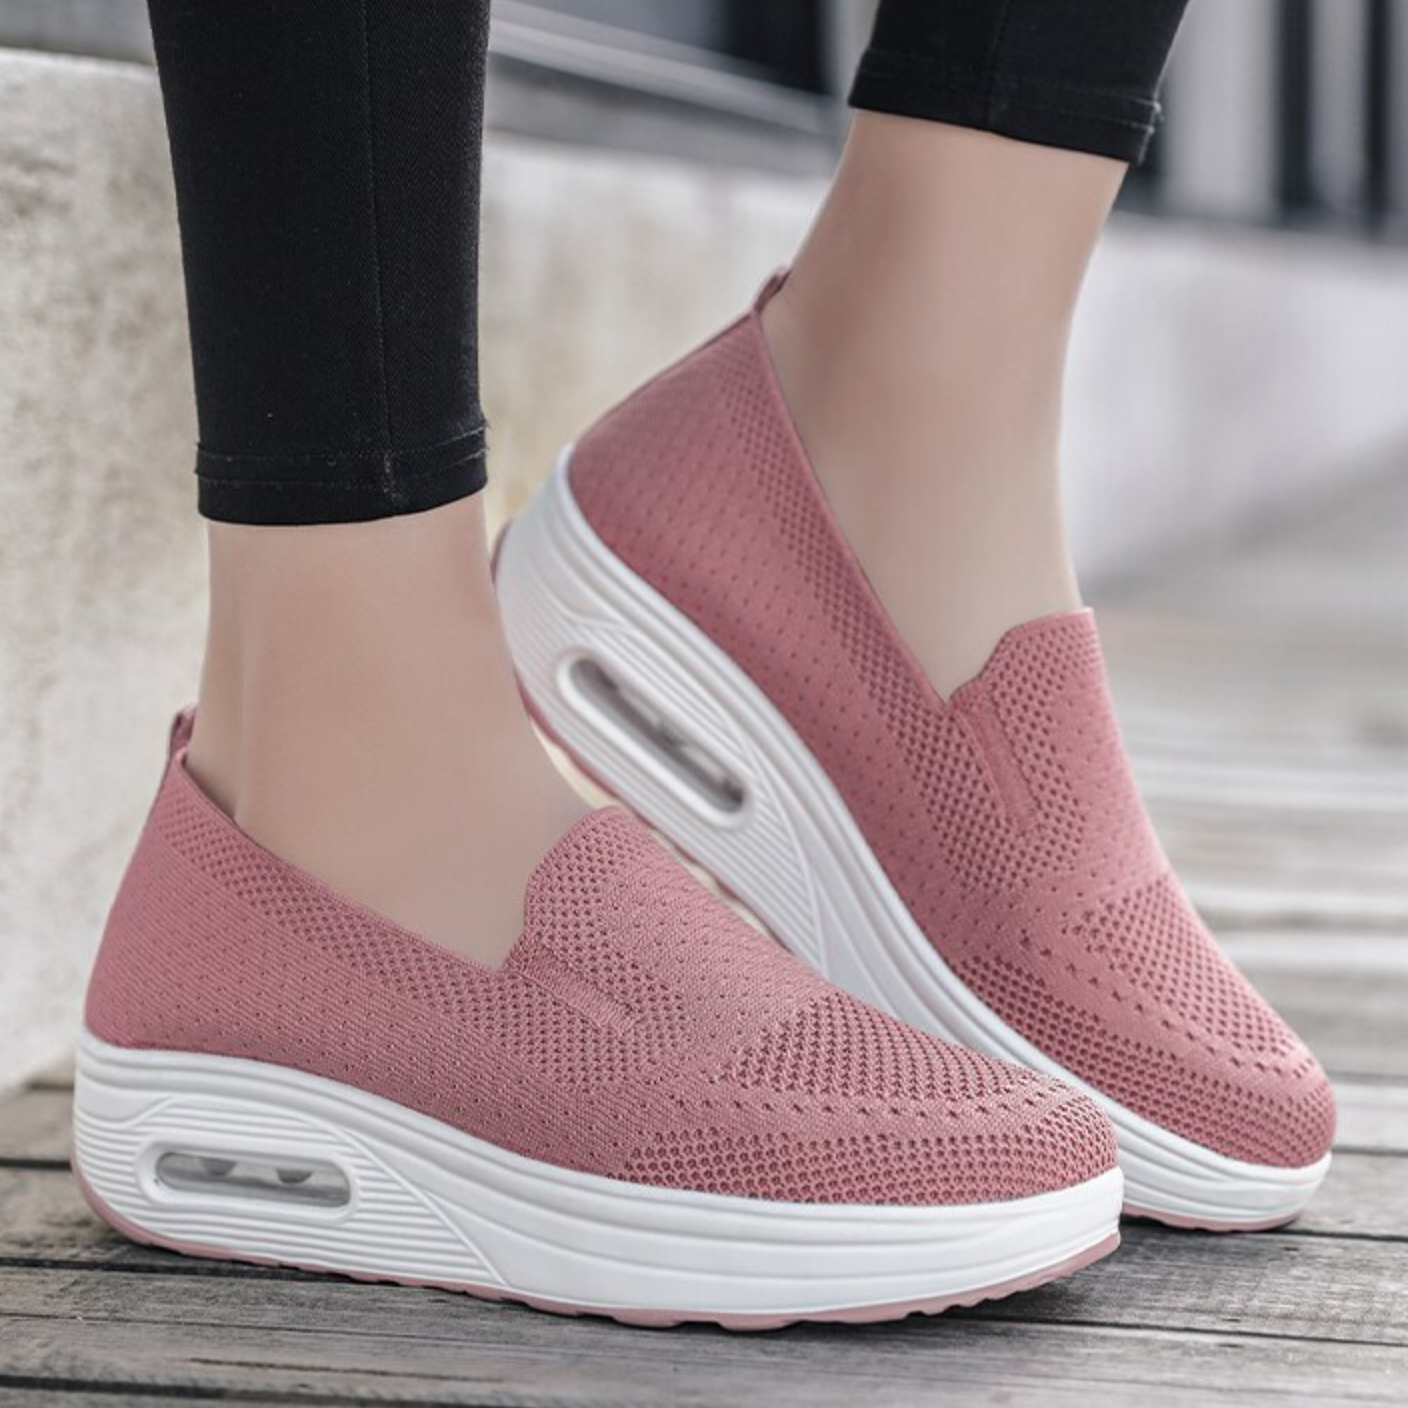 2023 Flying Woven Air Cushion Running Shoes, Thick Bottom Slip On Orthopedic Diabetic Walking Sneakers